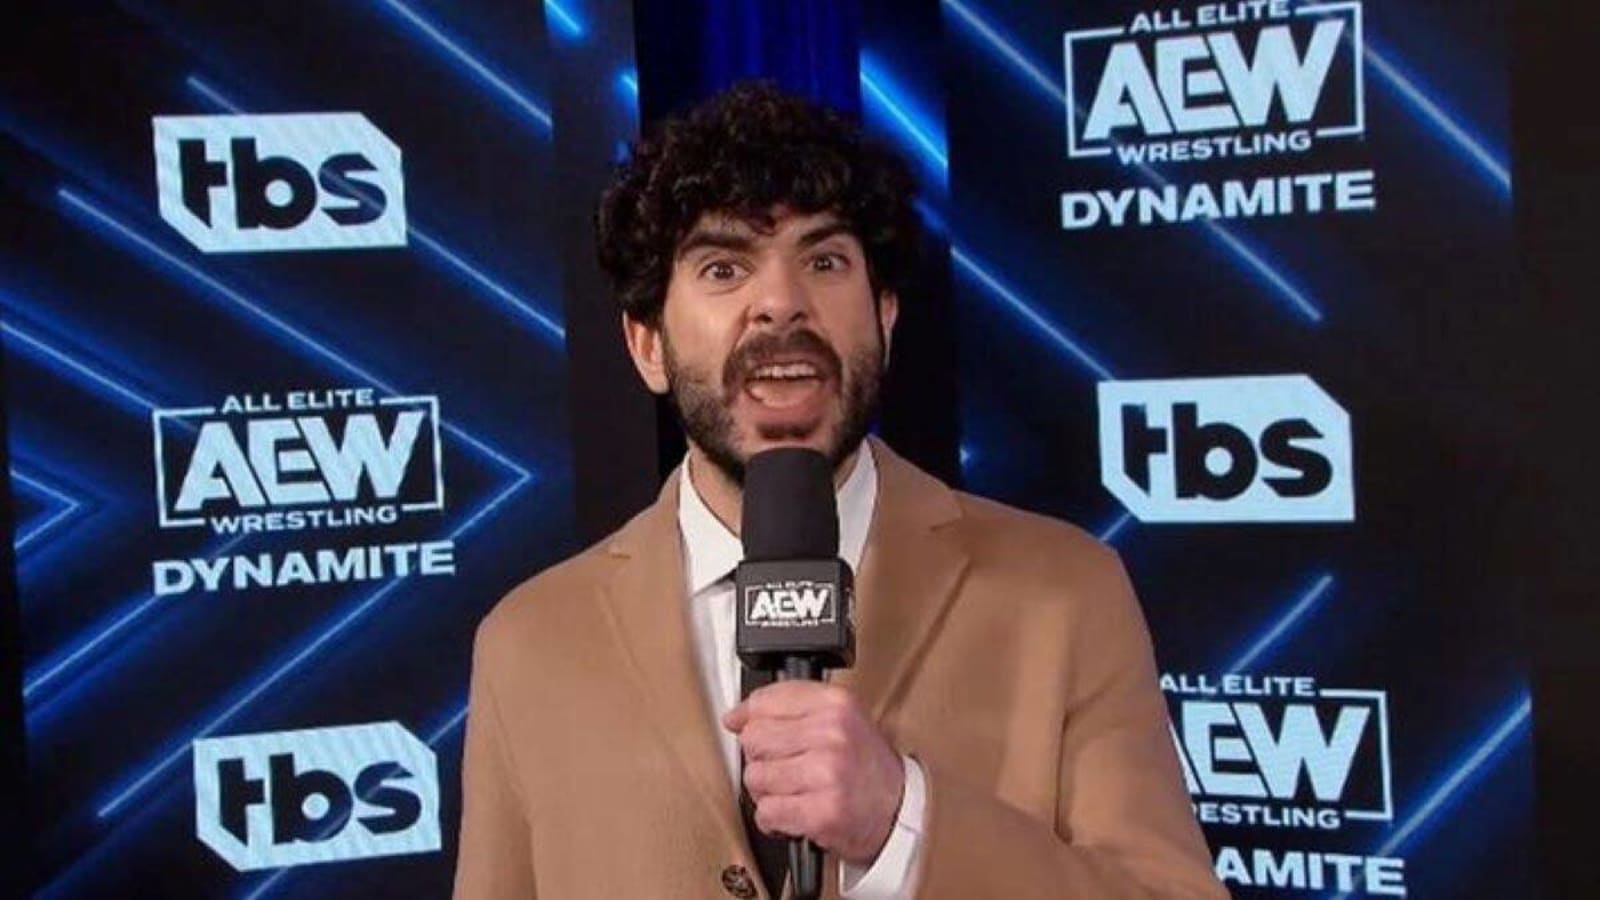 Tony Khan Reportedly Pushed Young Bucks-Will Ospreay Into CM Punk-Paul Levesque Attacks on AEW Dynamite, Vendetta Causing Locker Room Frustration